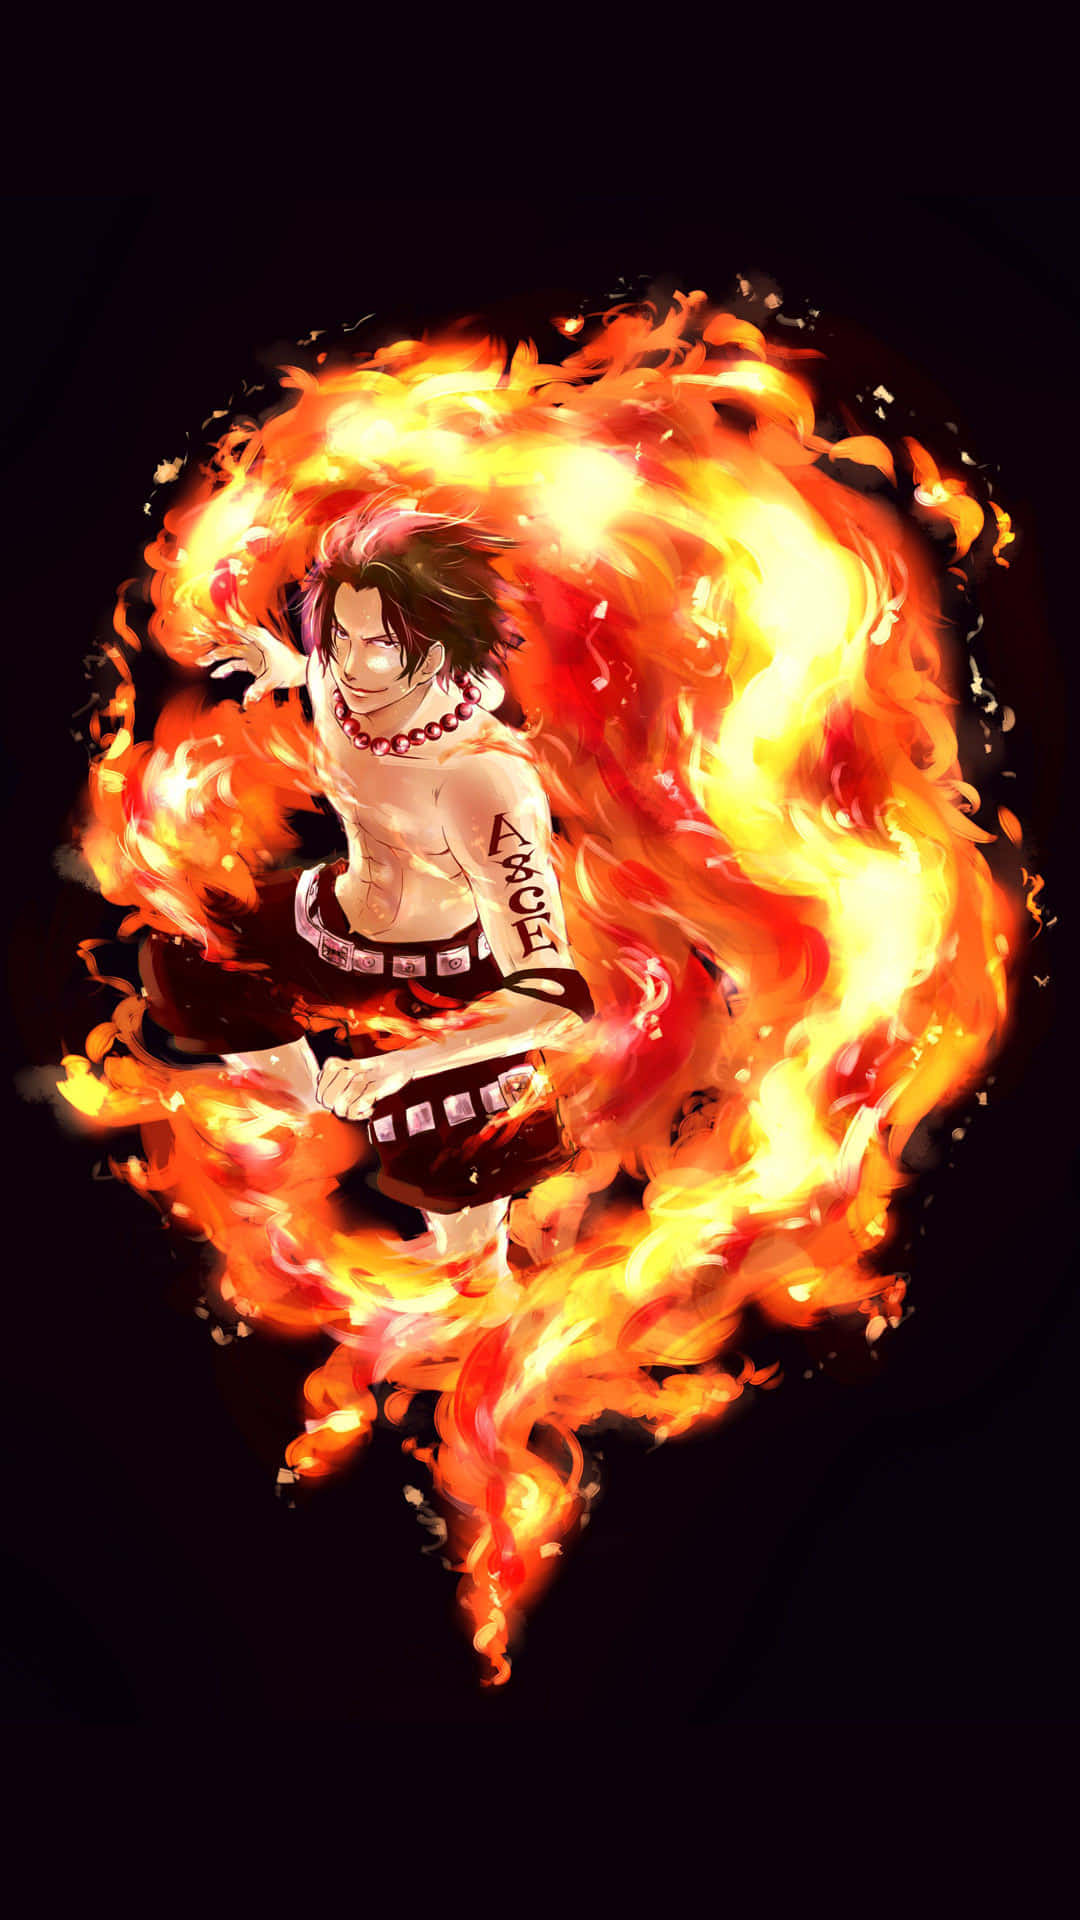 Portgas D Ace, the Warrior of Fire Wallpaper